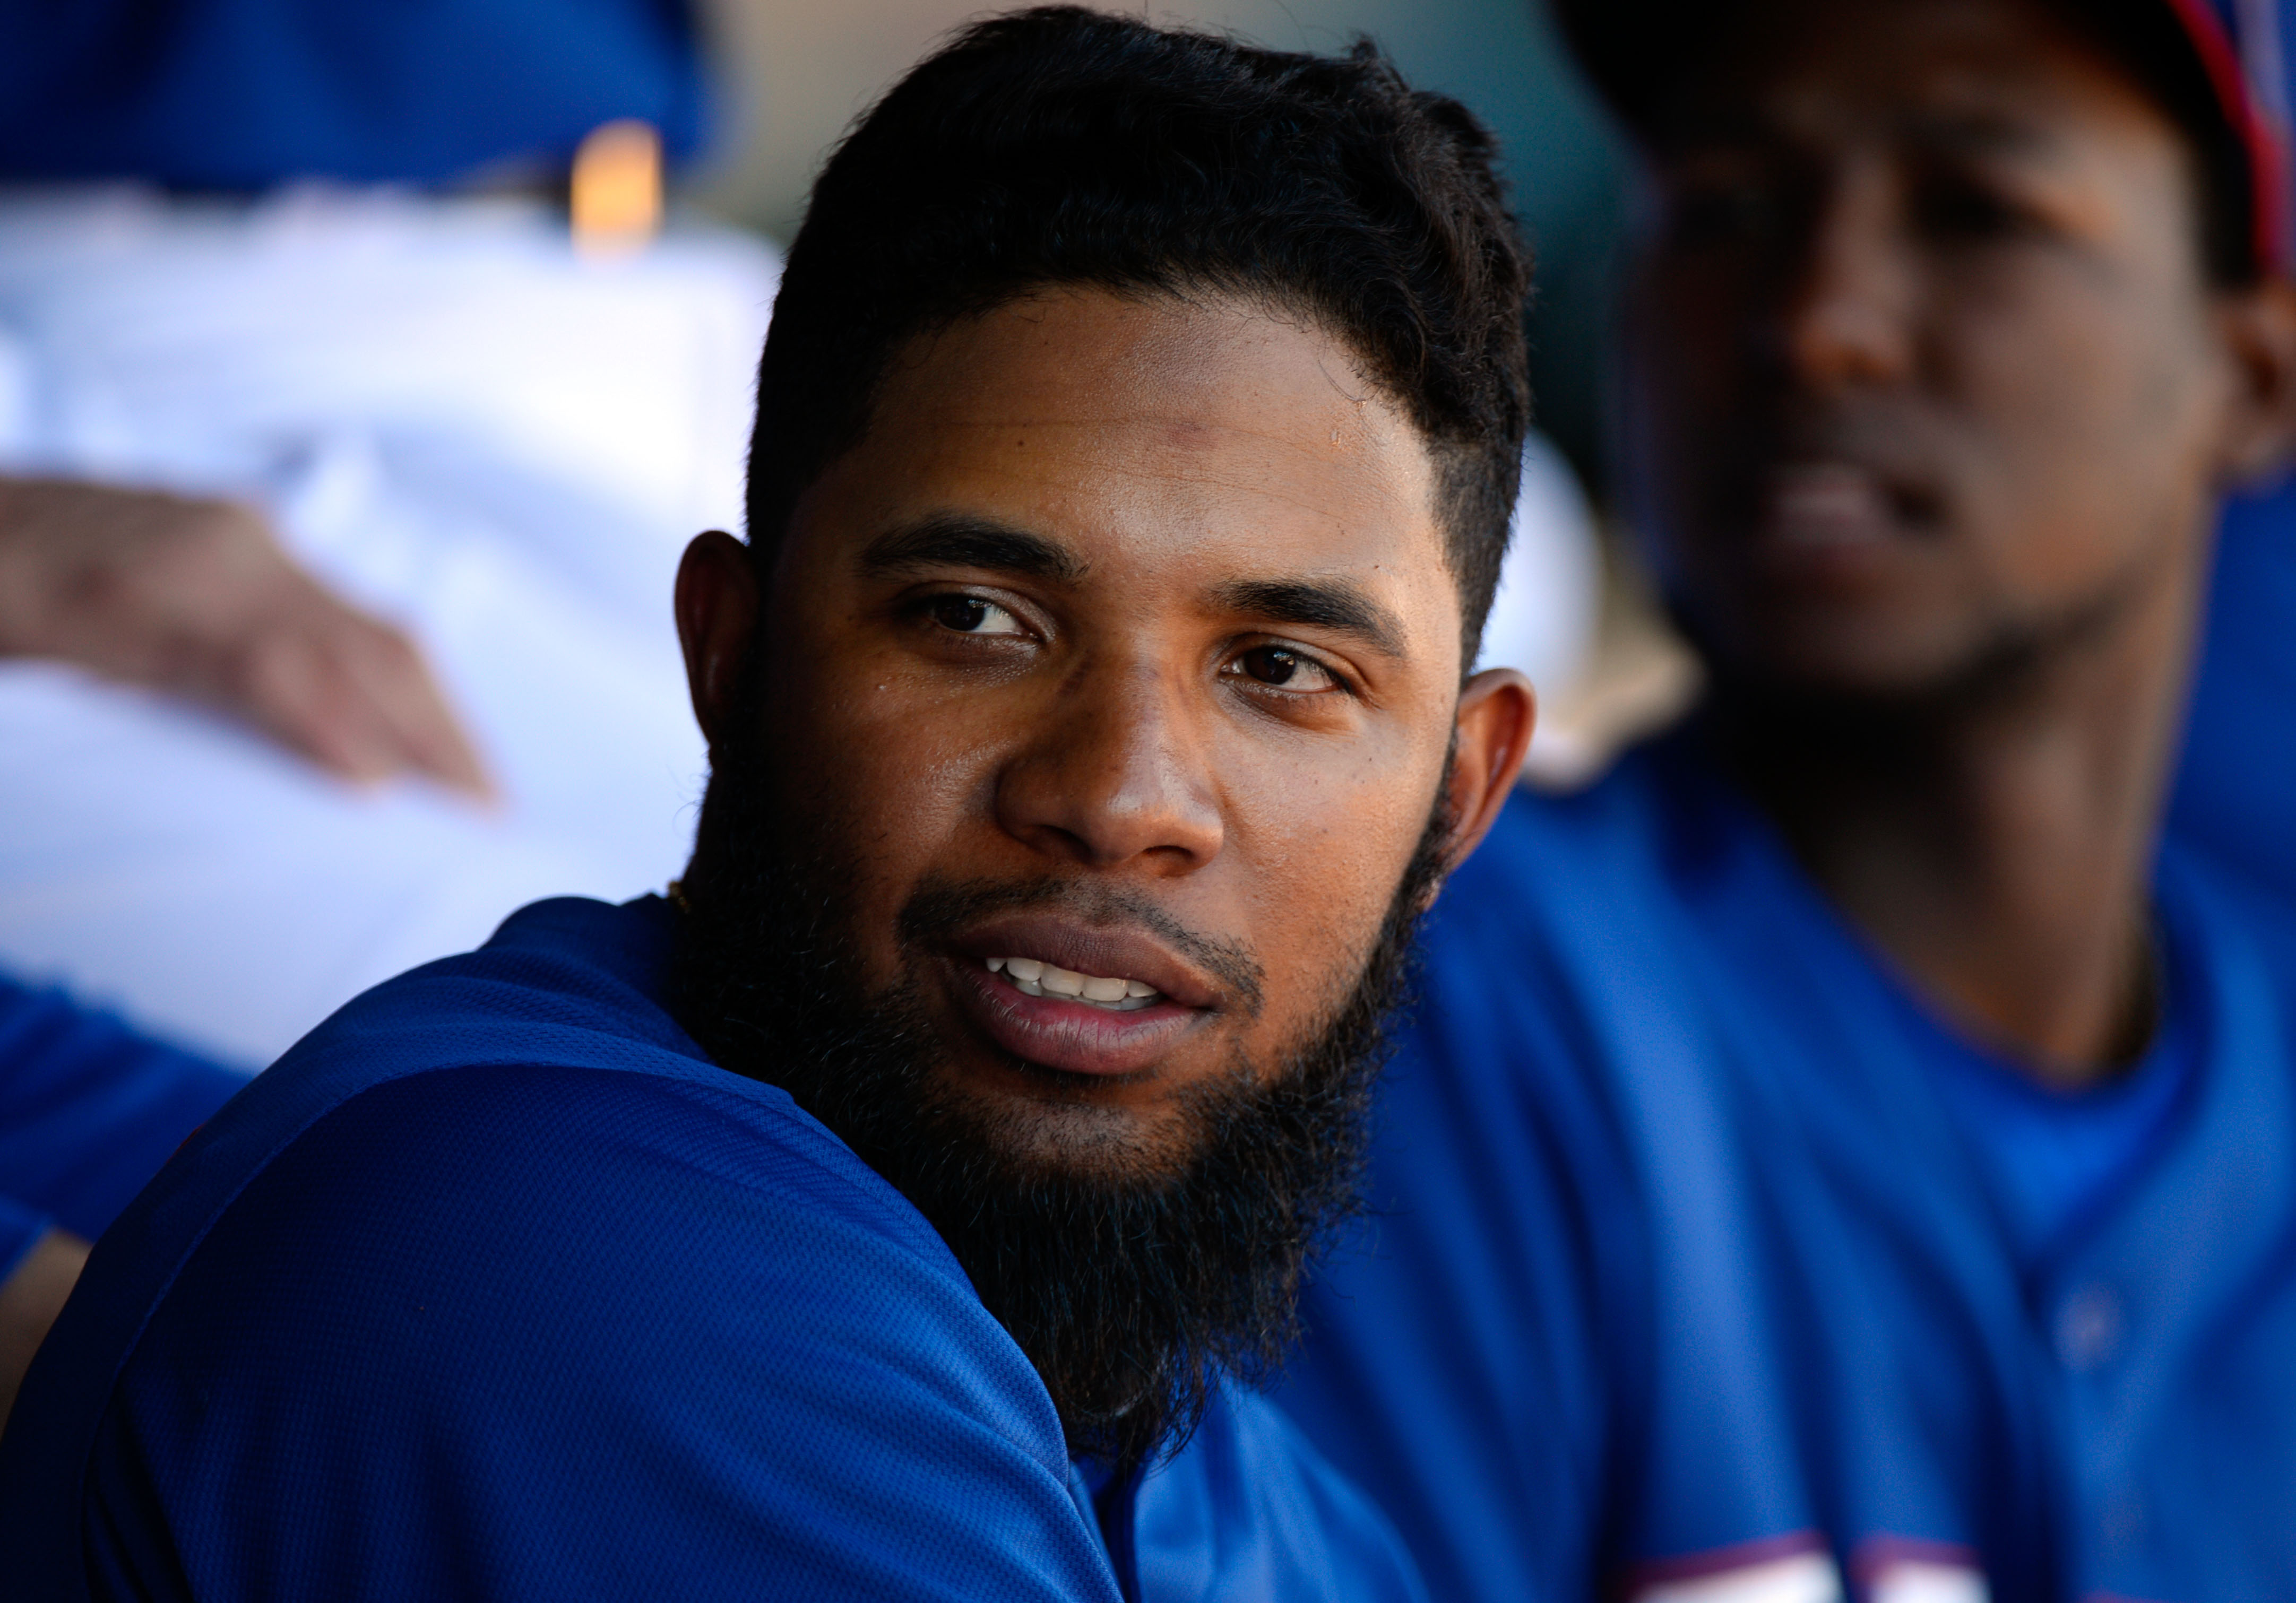 Elvis Andrus' beard is in playoff form on Opening Day